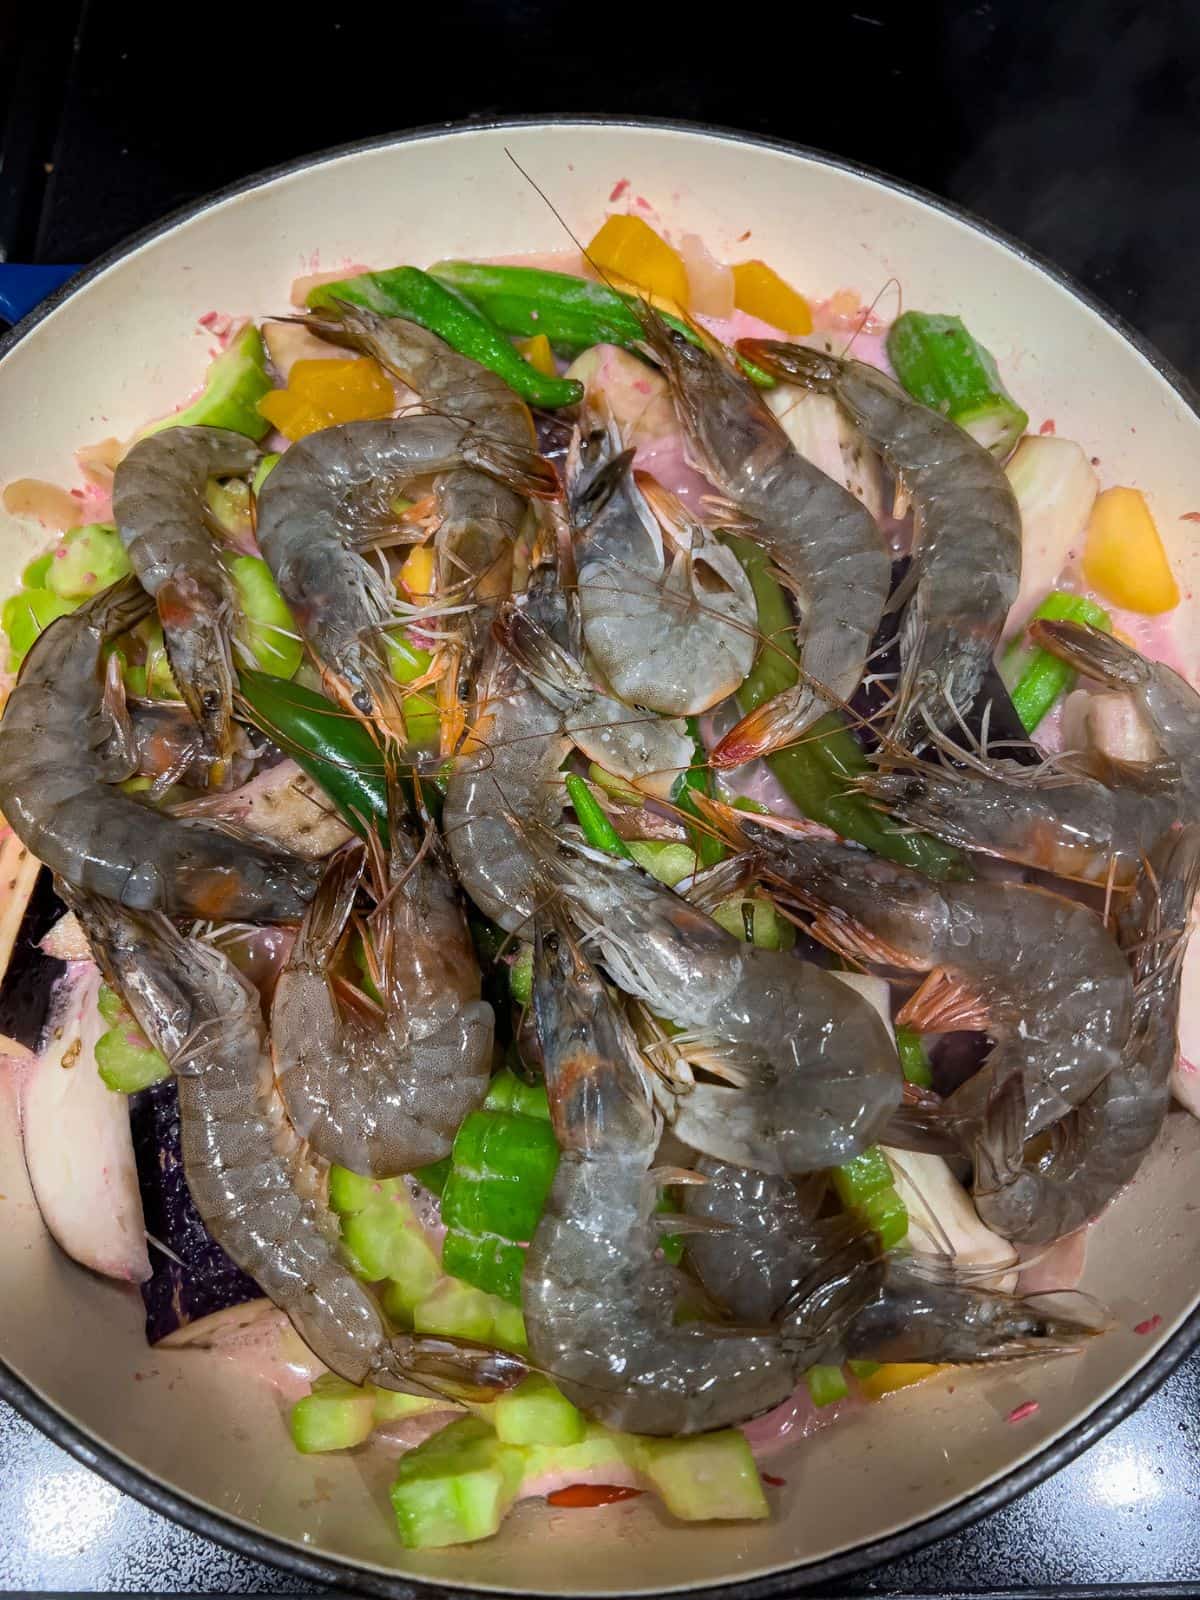 Adding the shrimp to cook the dish.